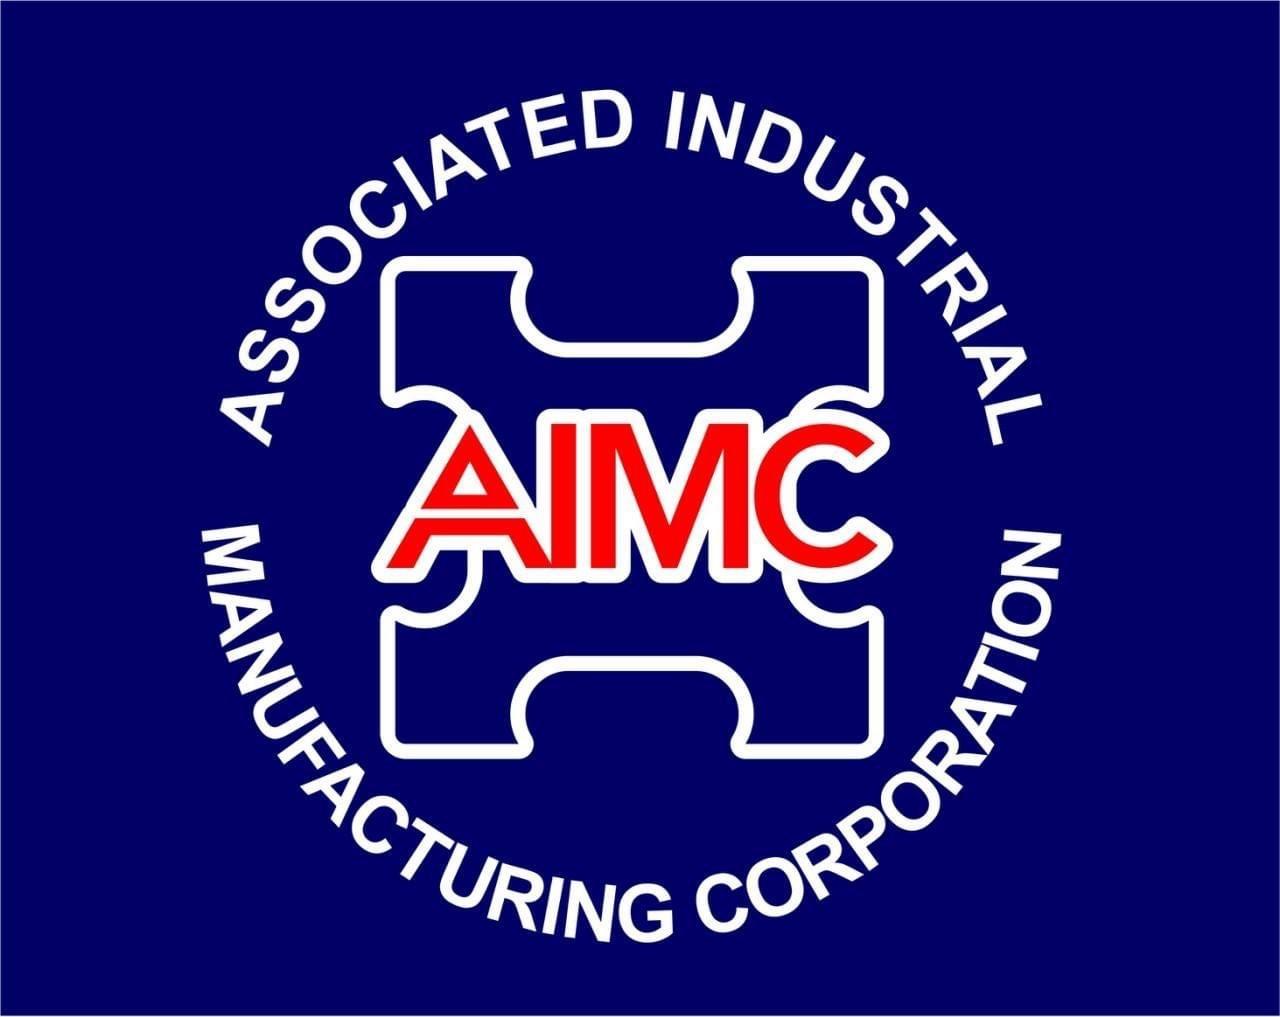 Associated Industrial Manufacturing Corporation